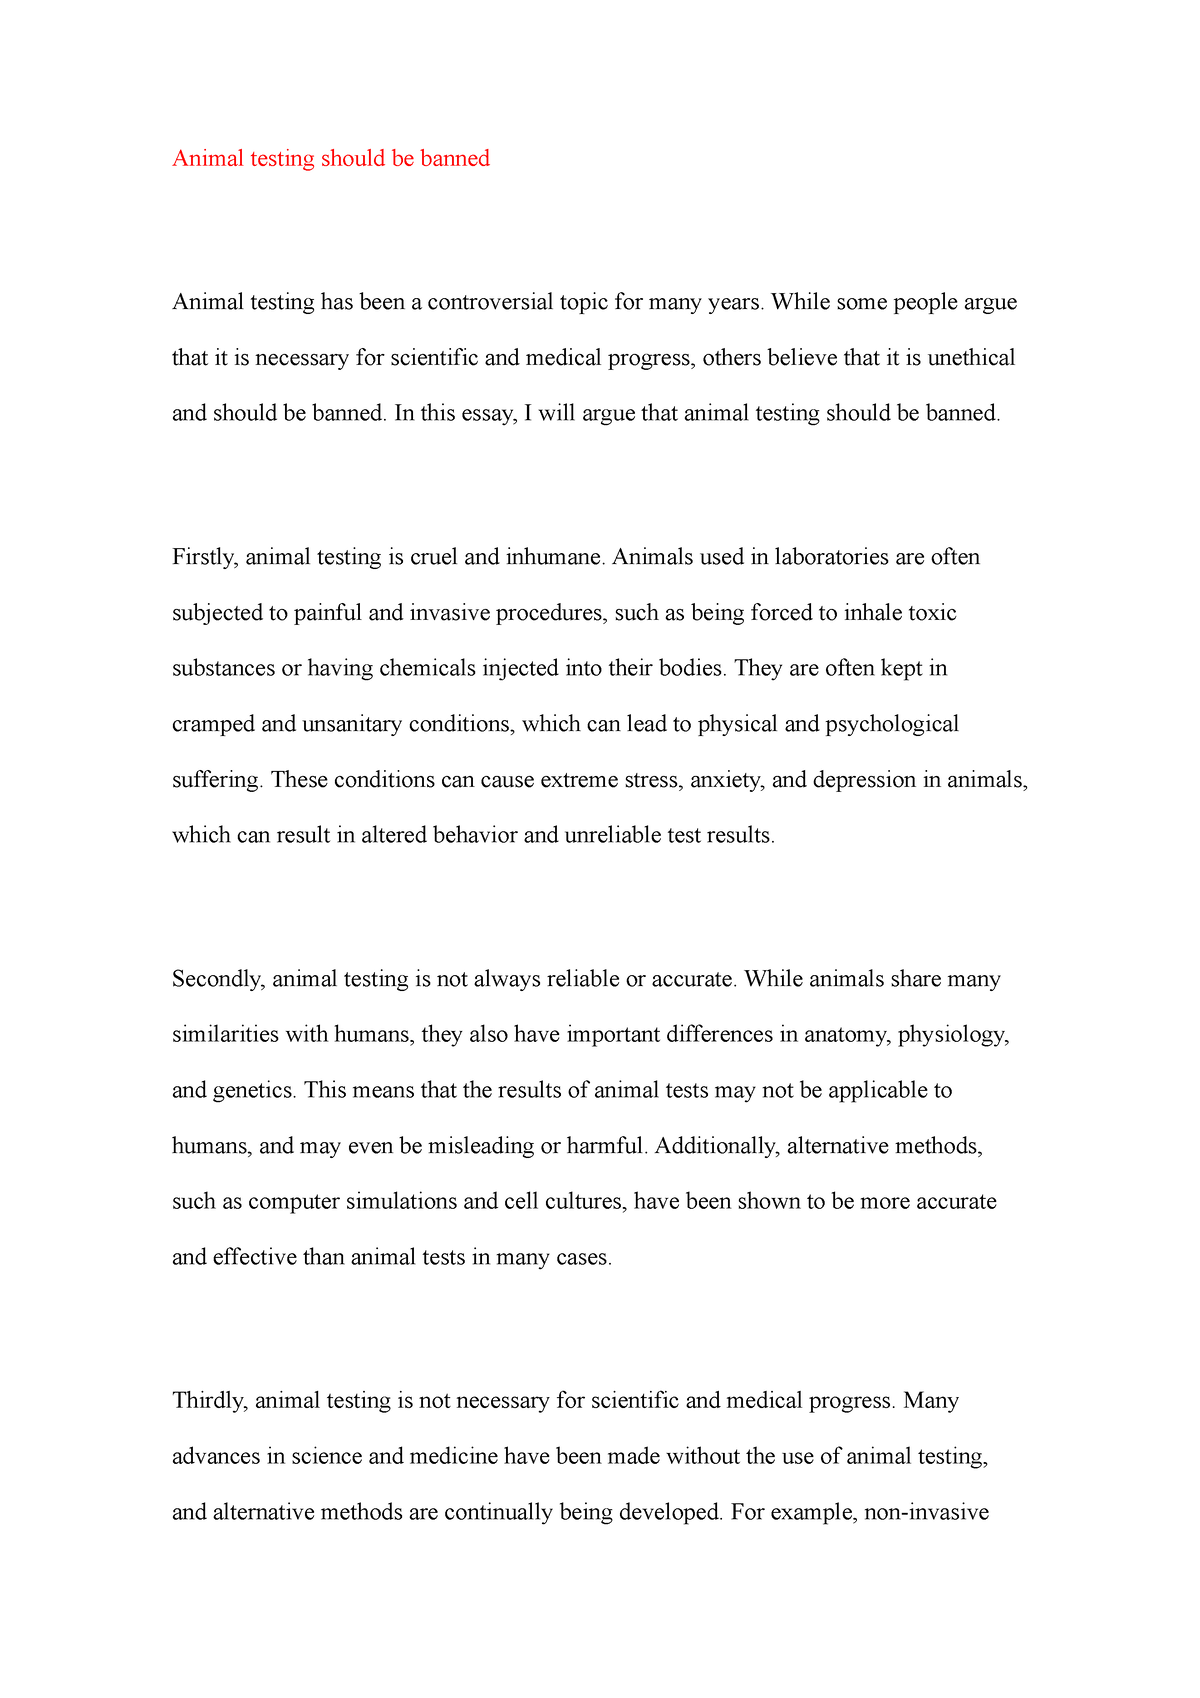 essay about why animal testing should be banned